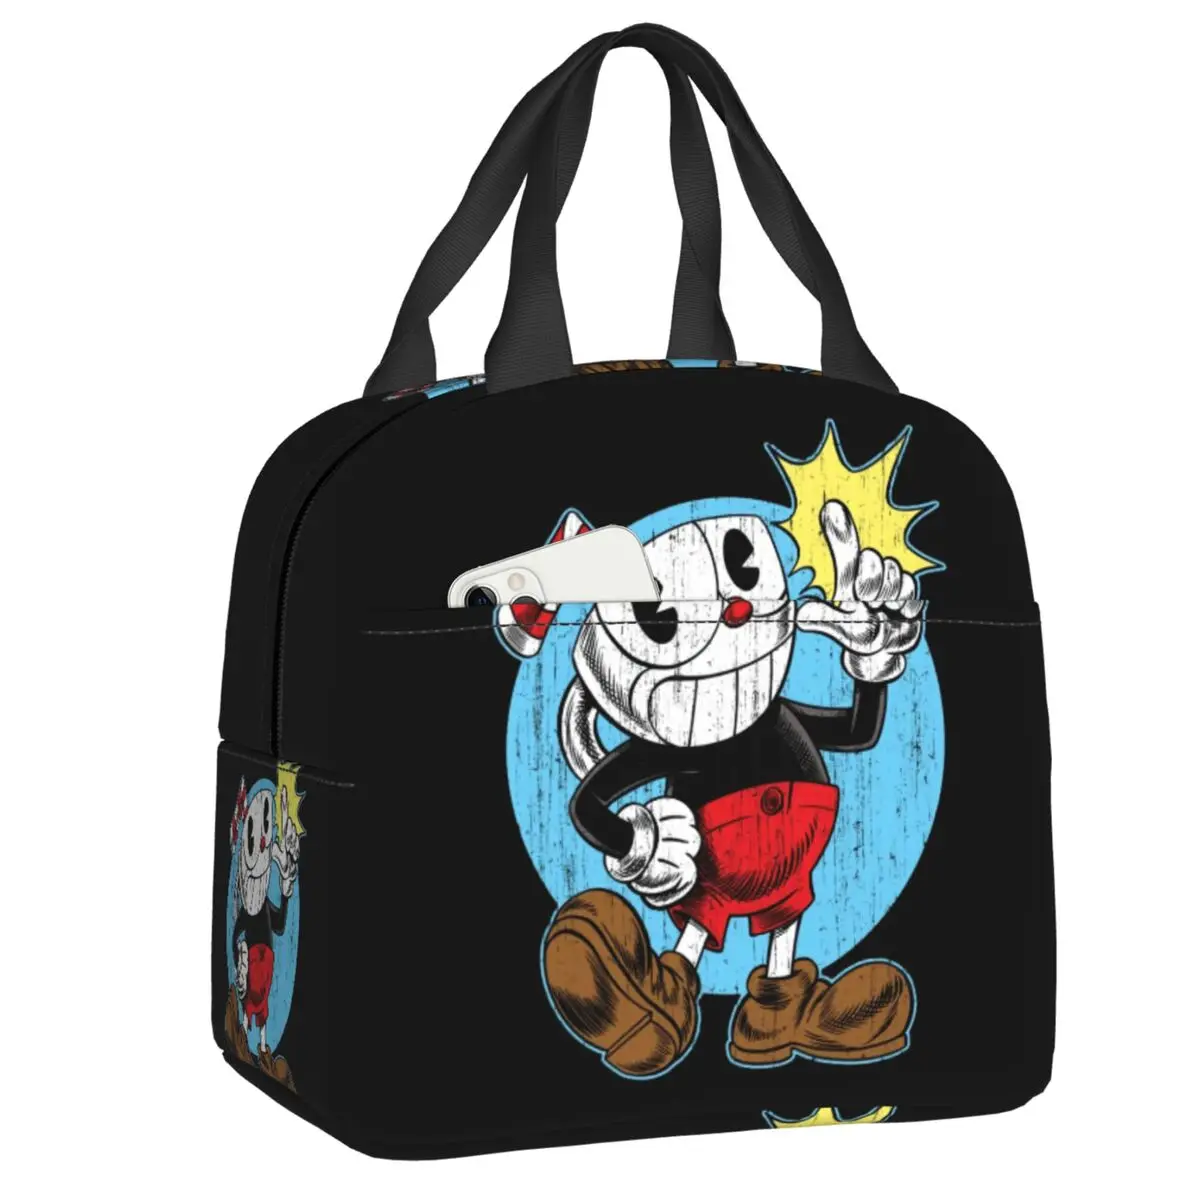 Cartoon Game Cuphead Portable Lunch Box Women Multifunction Cooler Thermal Food Insulated Lunch Bag School Children Picnic Bags